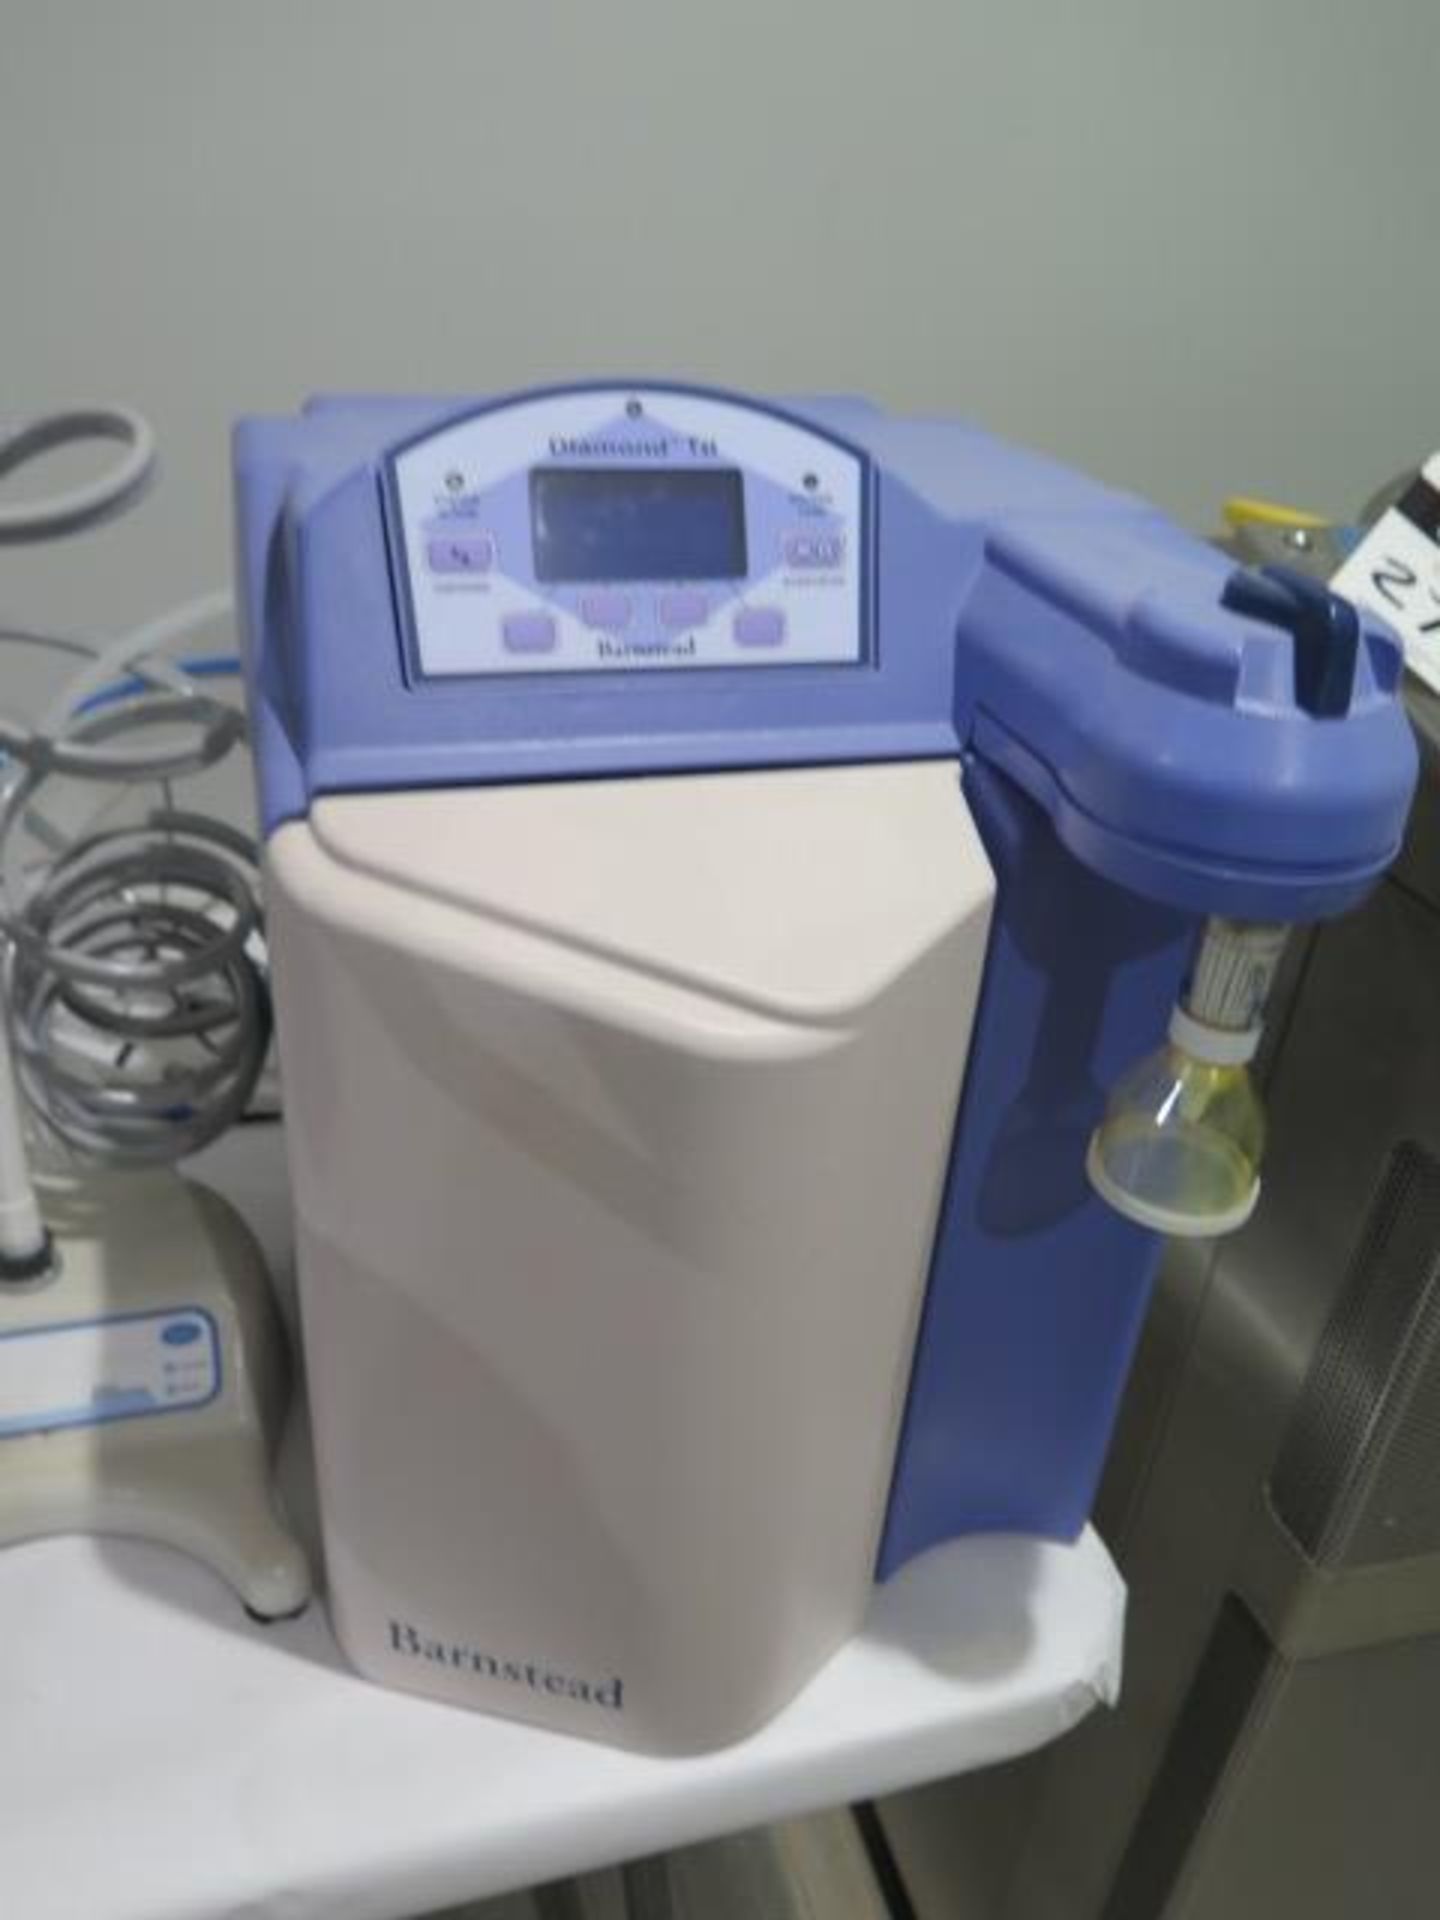 Barnstead NANOpure Diamond Water Purification System w/ TS Accudispense Volumetric Disp, SOLD AS IS - Image 5 of 10